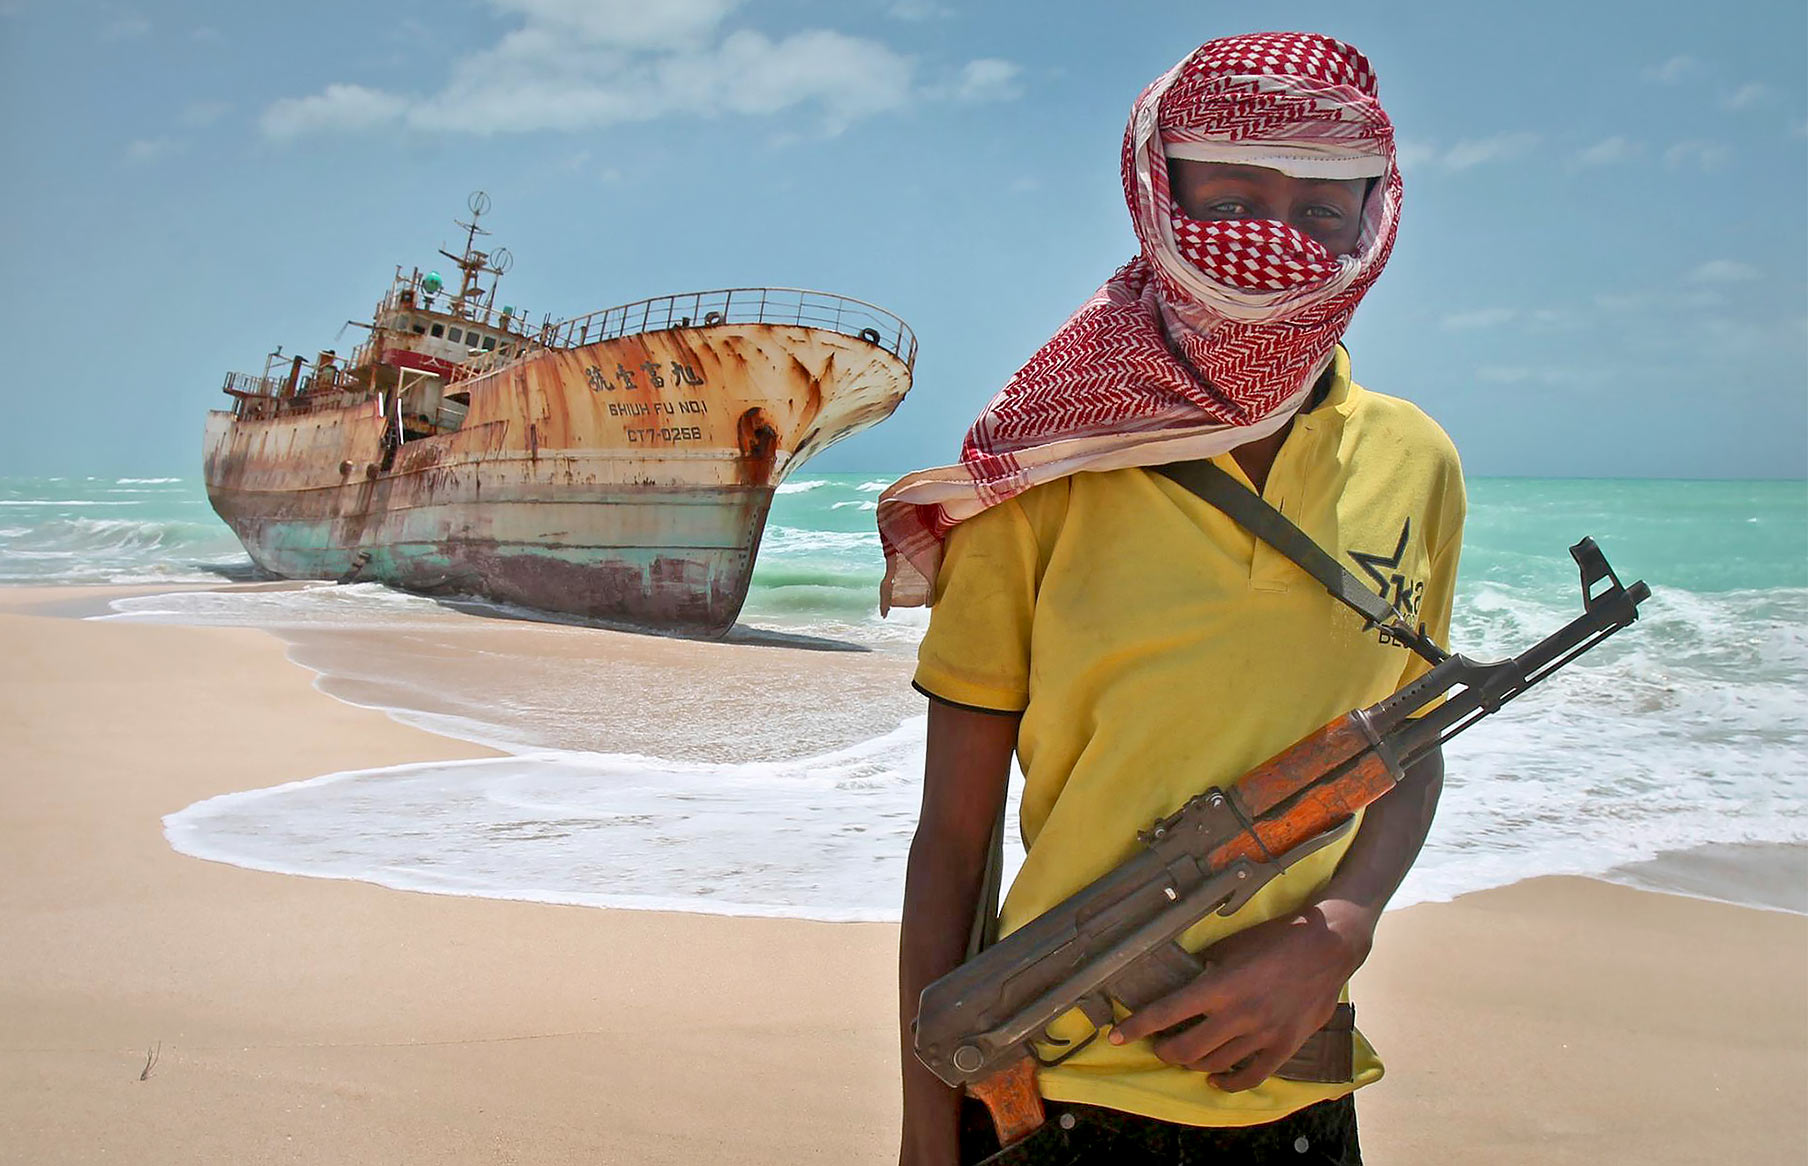 Superyacht Captains beware of pirates in the Indian Ocean.